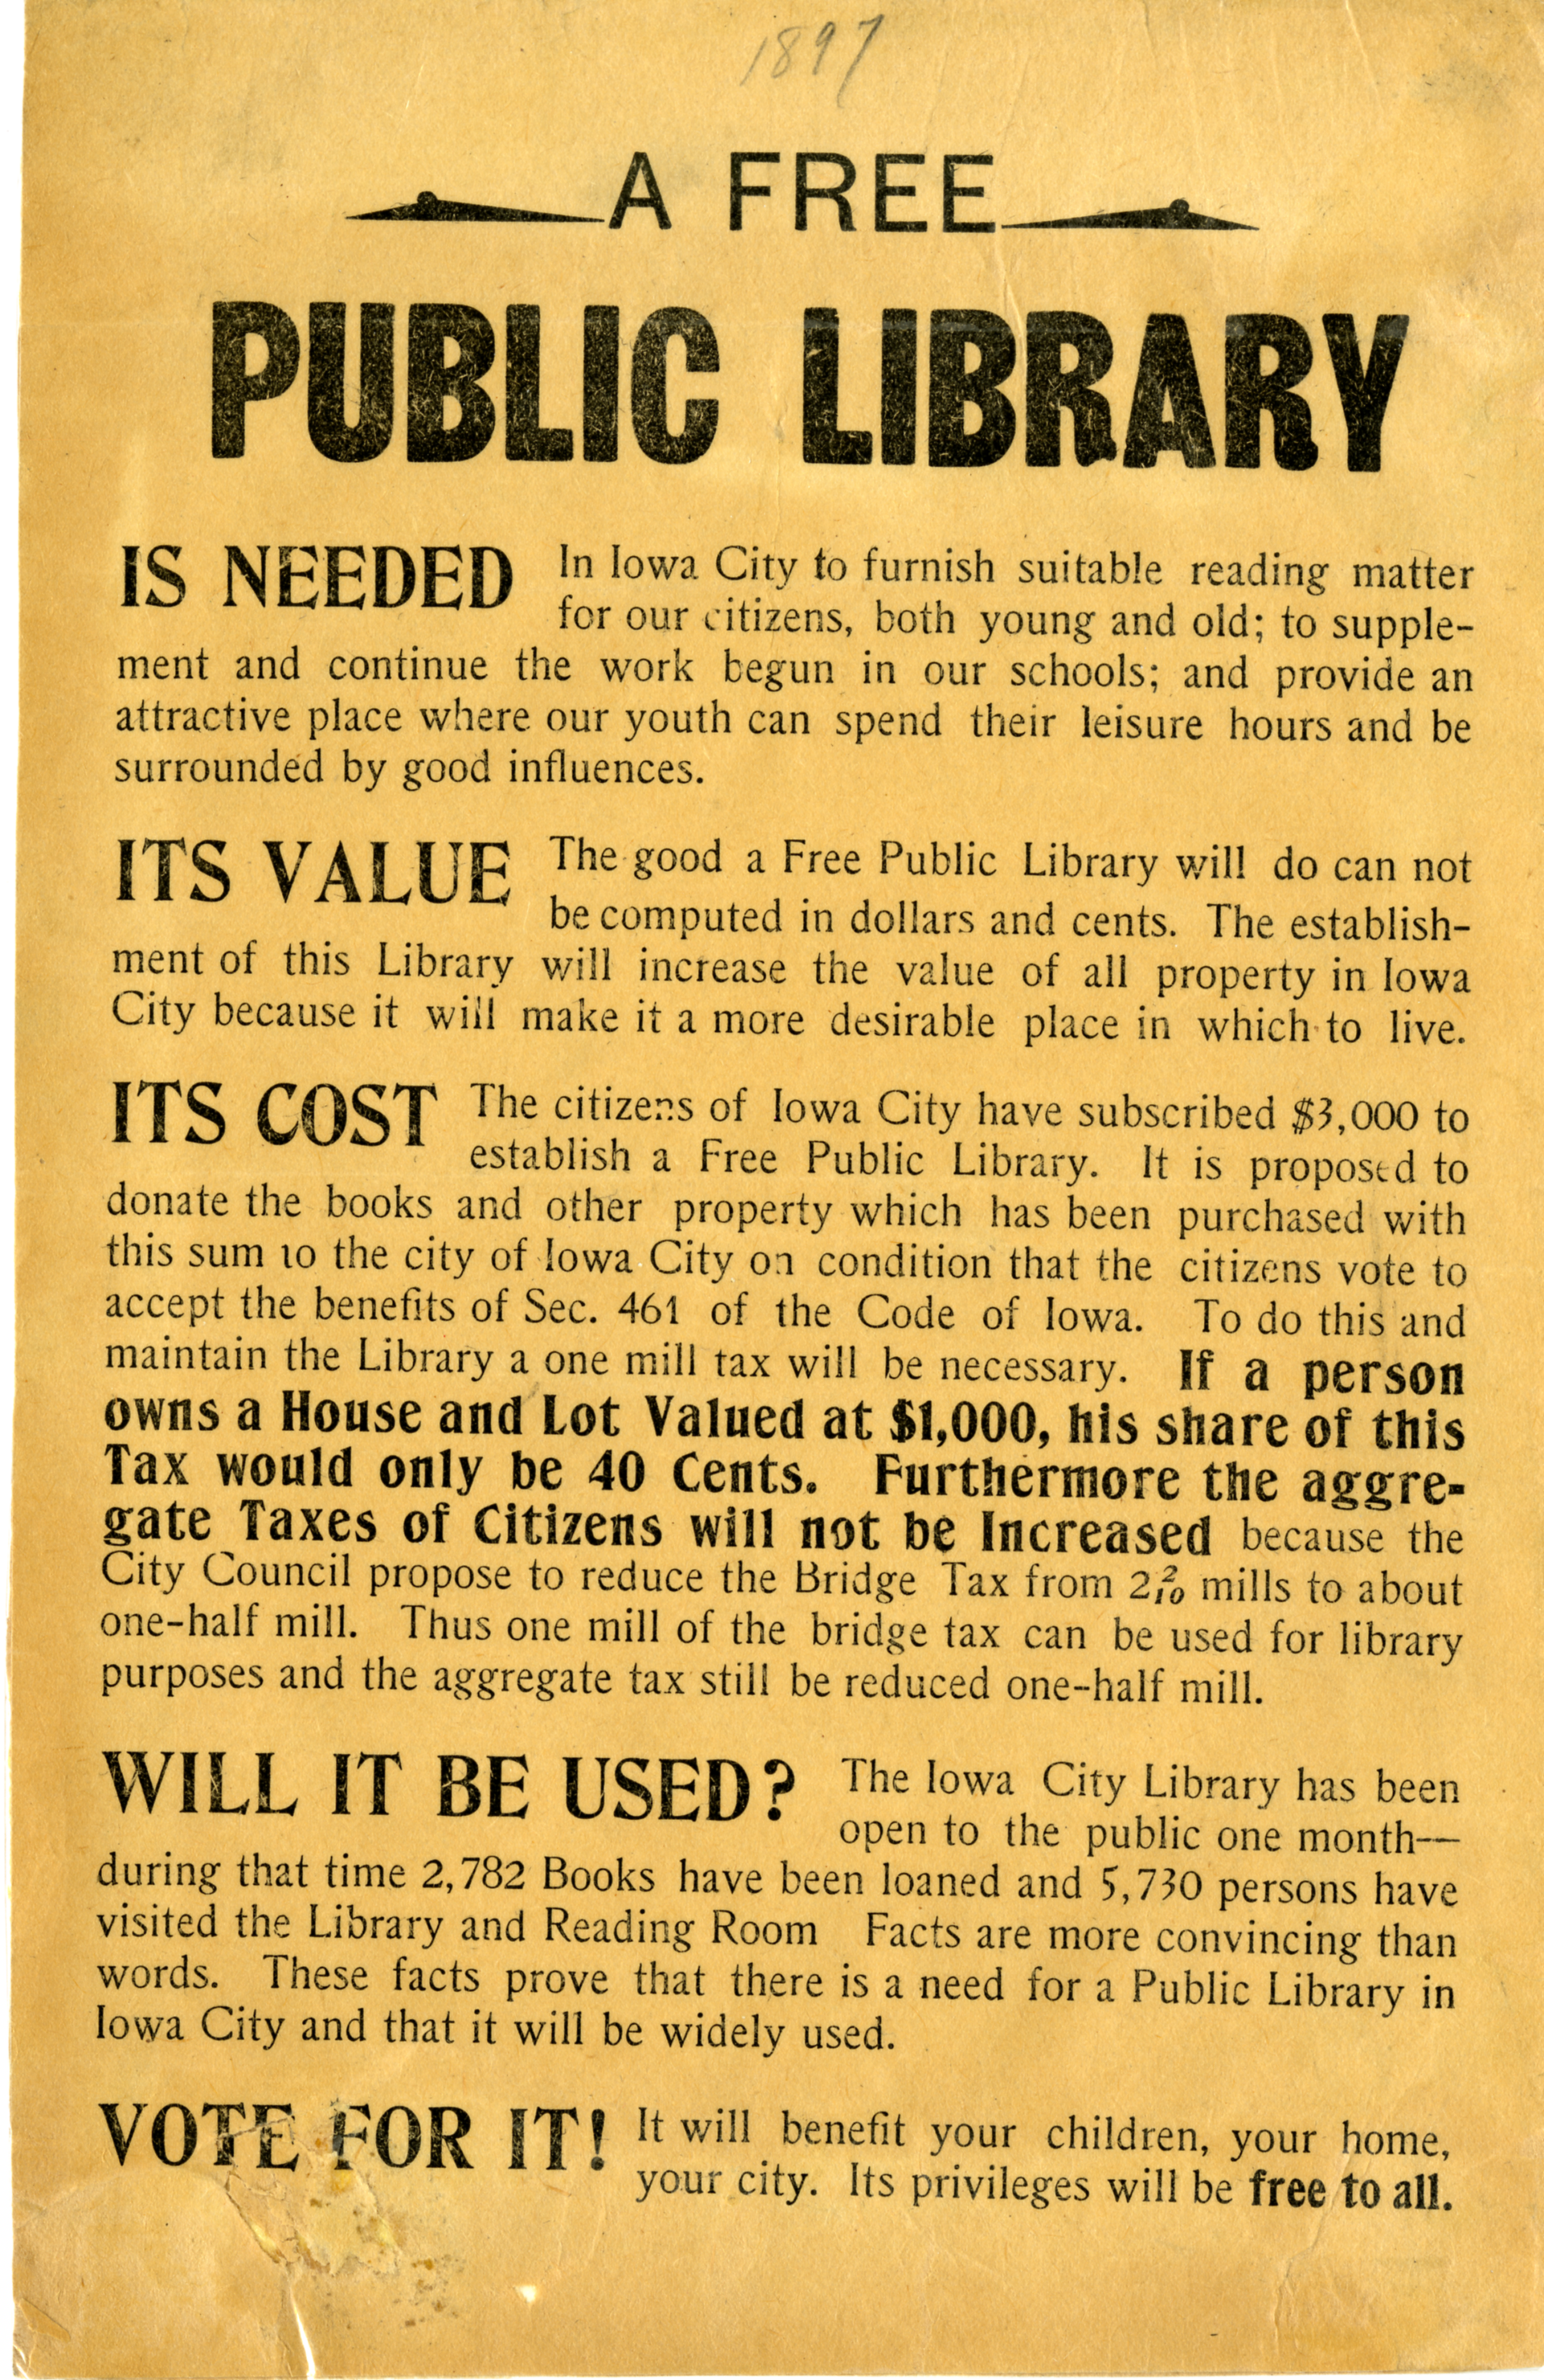 A free public library is needed; its value; its cost; will it be used?; vote for it!